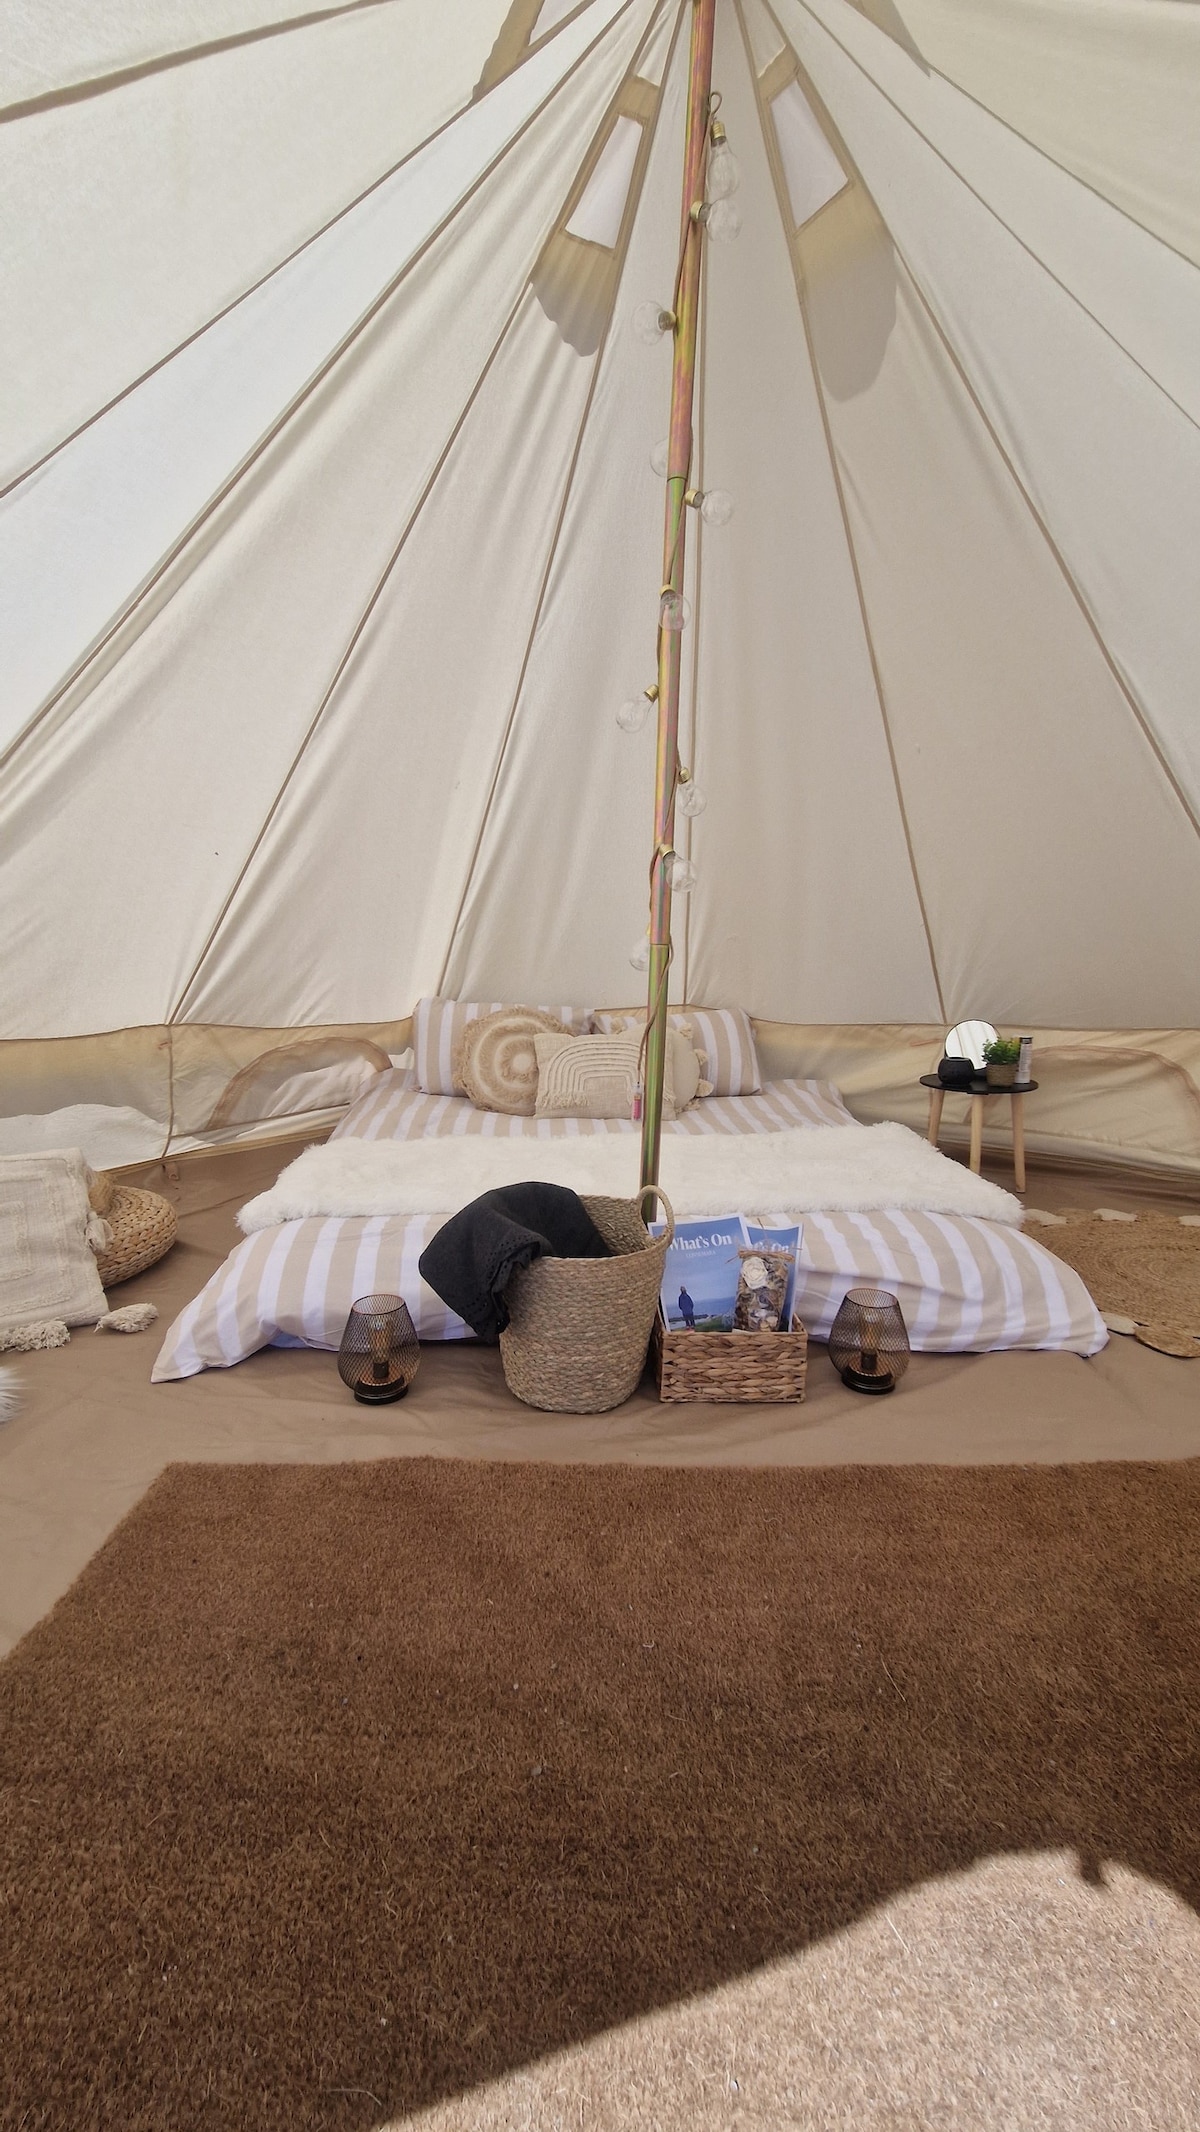 Shaun's Shed - Bell Tent